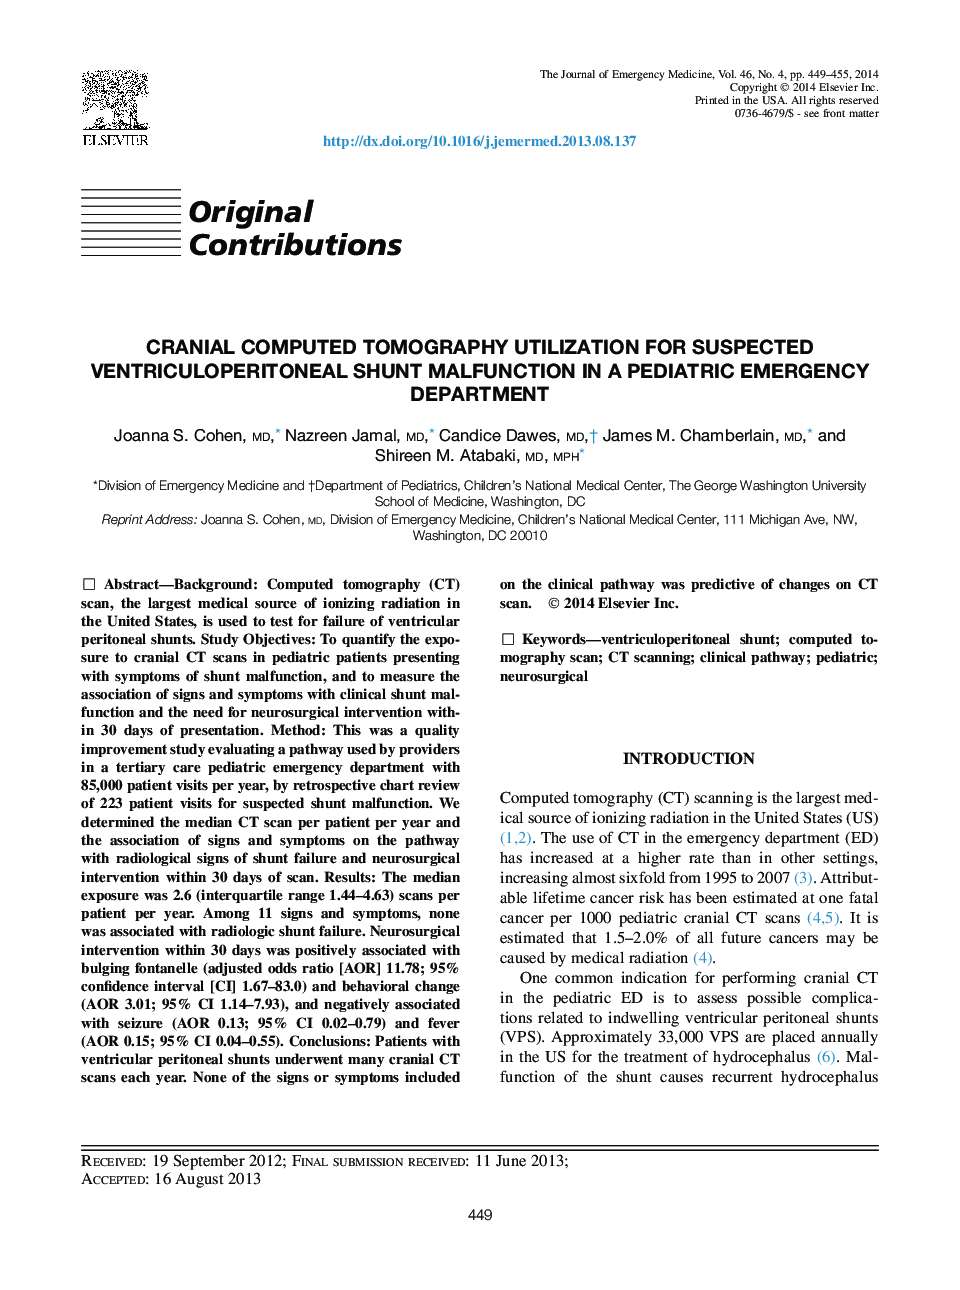 Cranial Computed Tomography Utilization for Suspected Ventriculoperitoneal Shunt Malfunction in a Pediatric Emergency Department